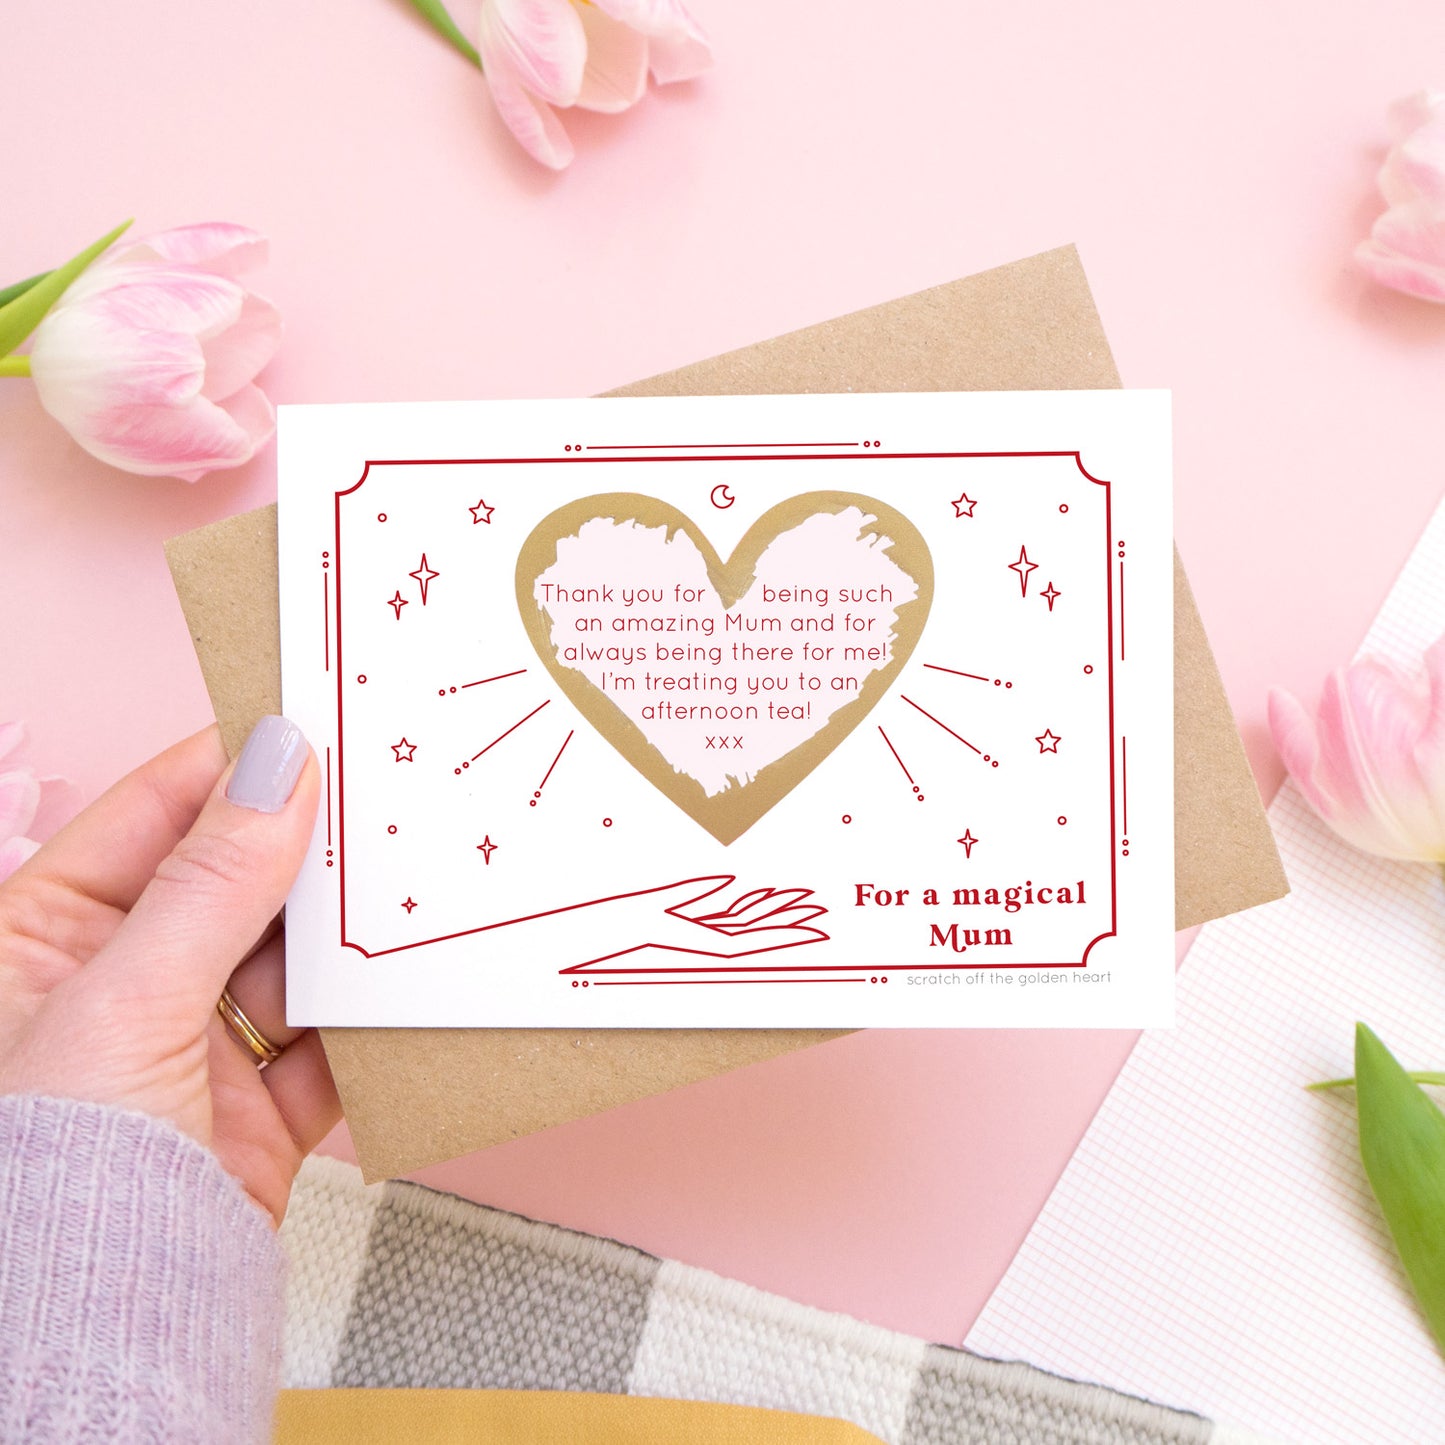 A personalised 'magical mum' scratch card showing how your personalised message could look with the gold heart scratched off. The card is being held over a pink background with pink tulips.